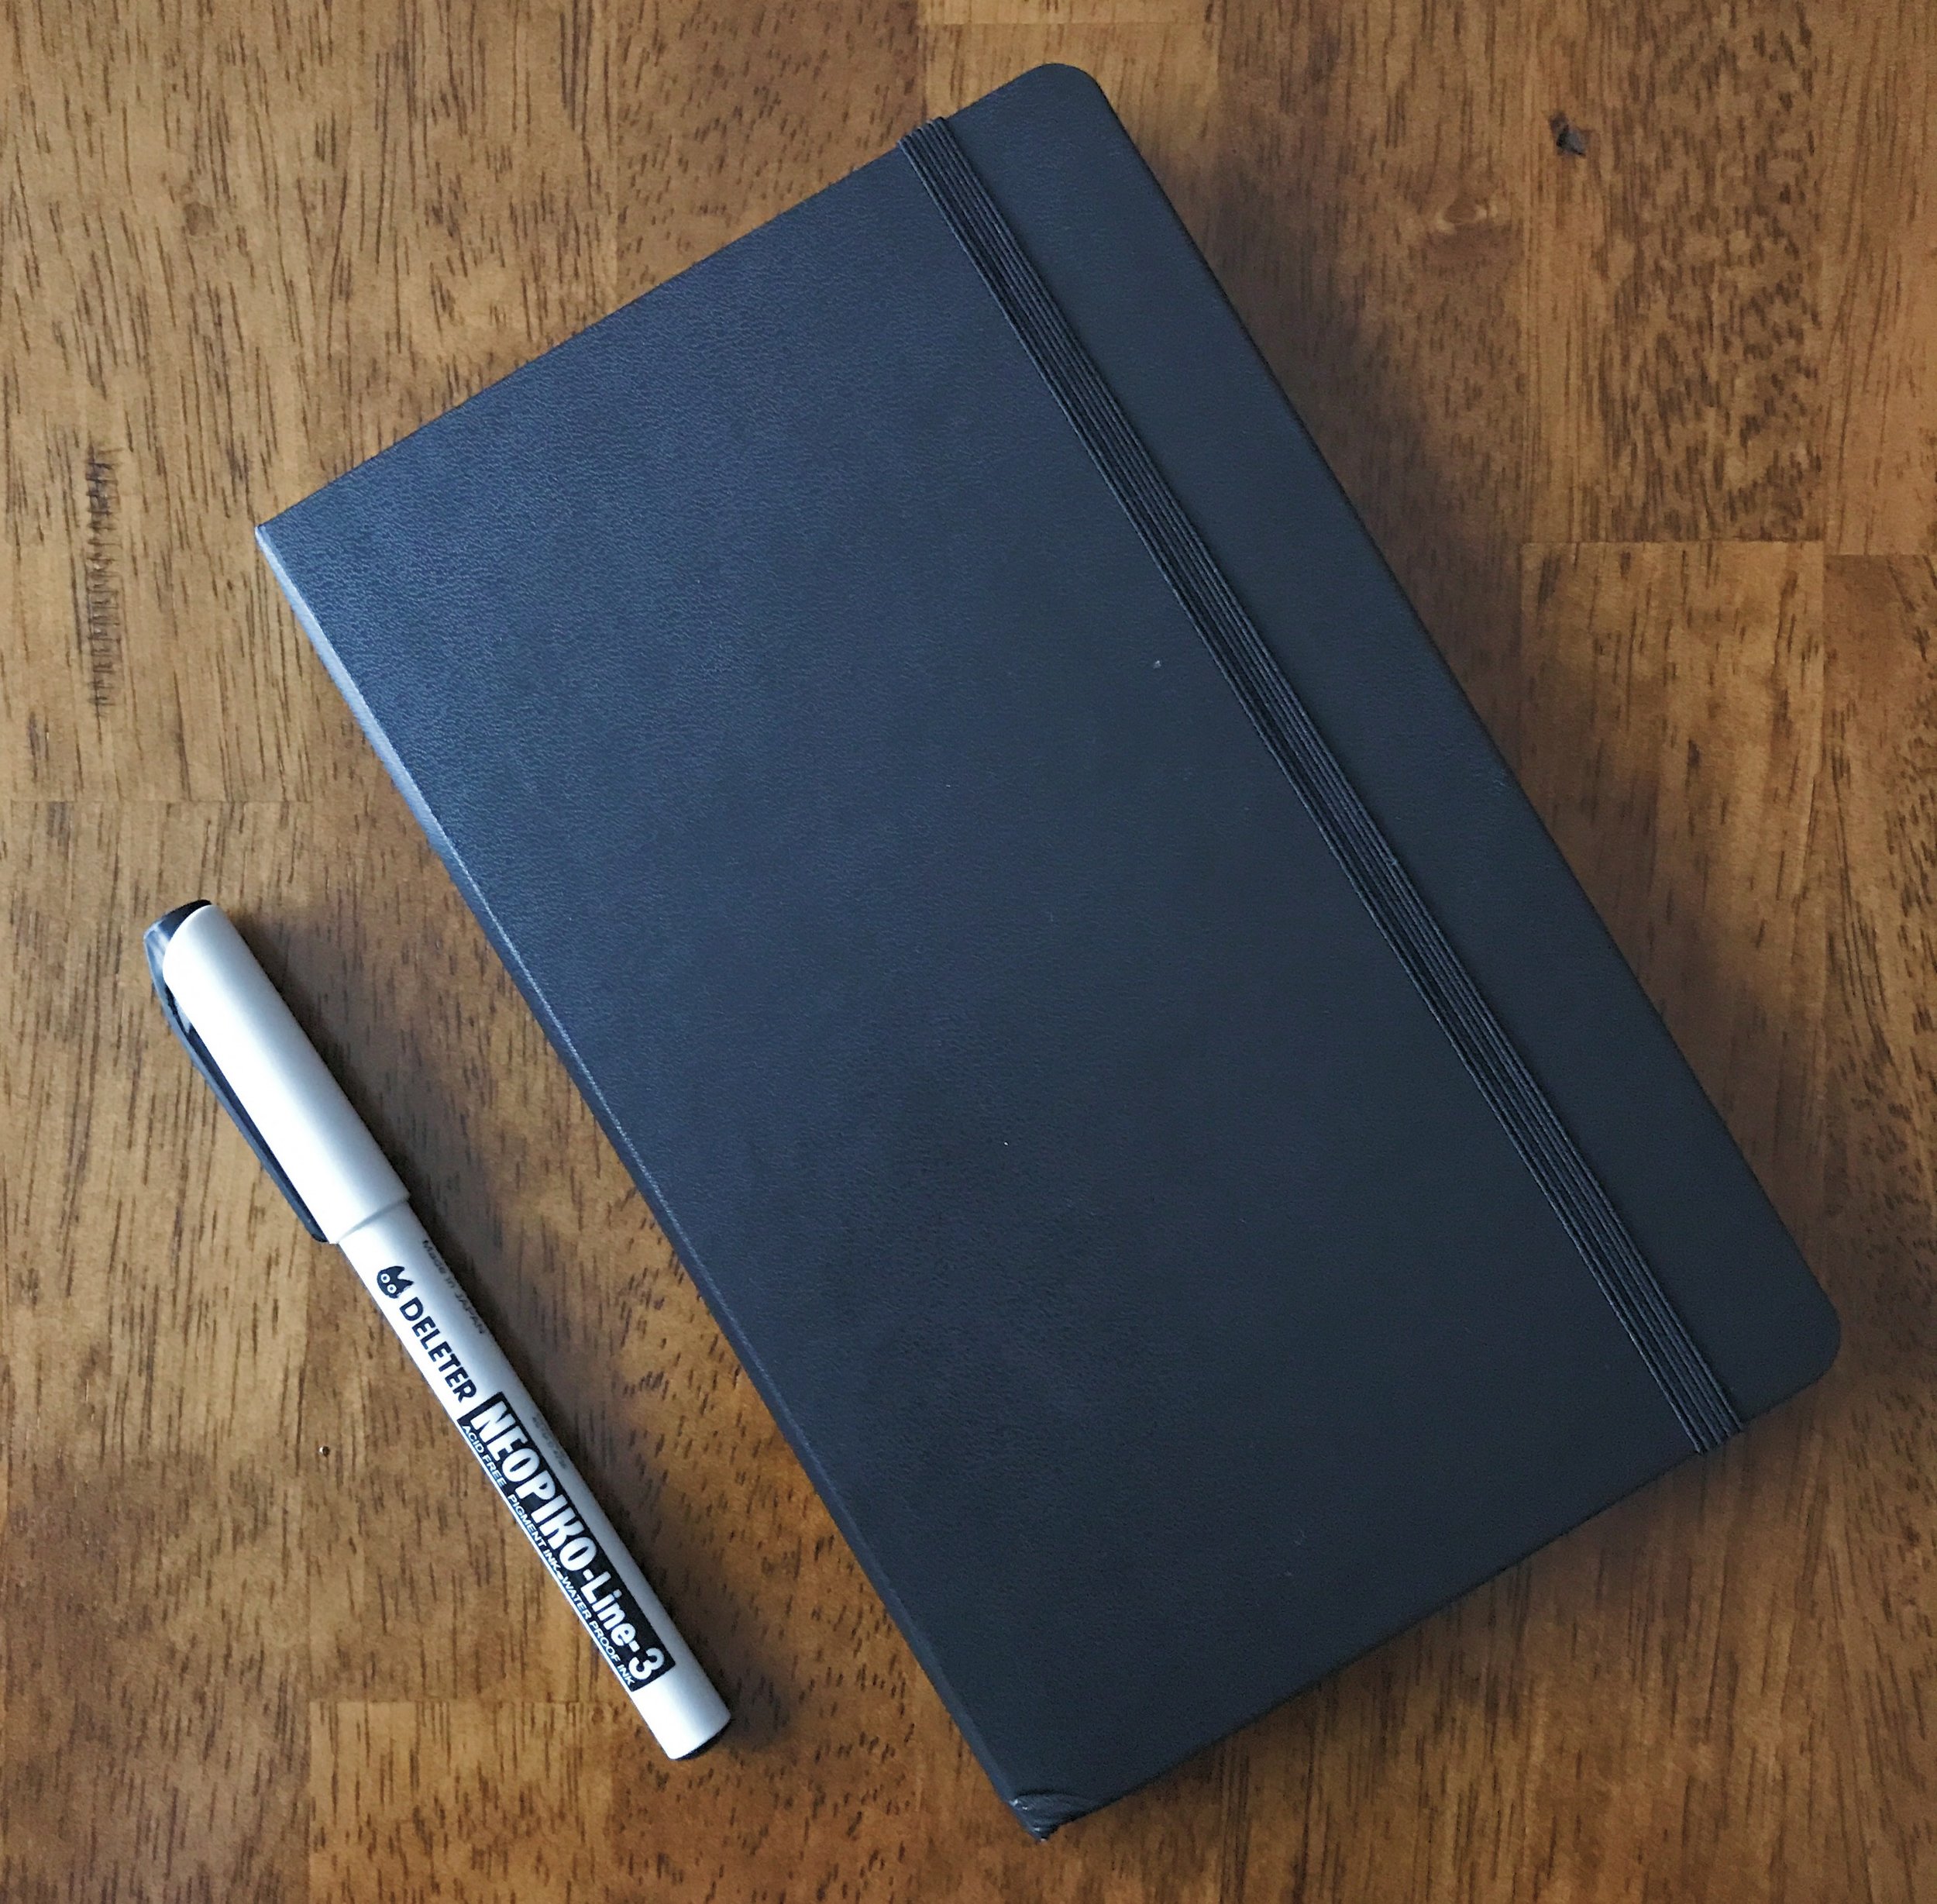 Is it Better to Journal in Pen or Pencil?